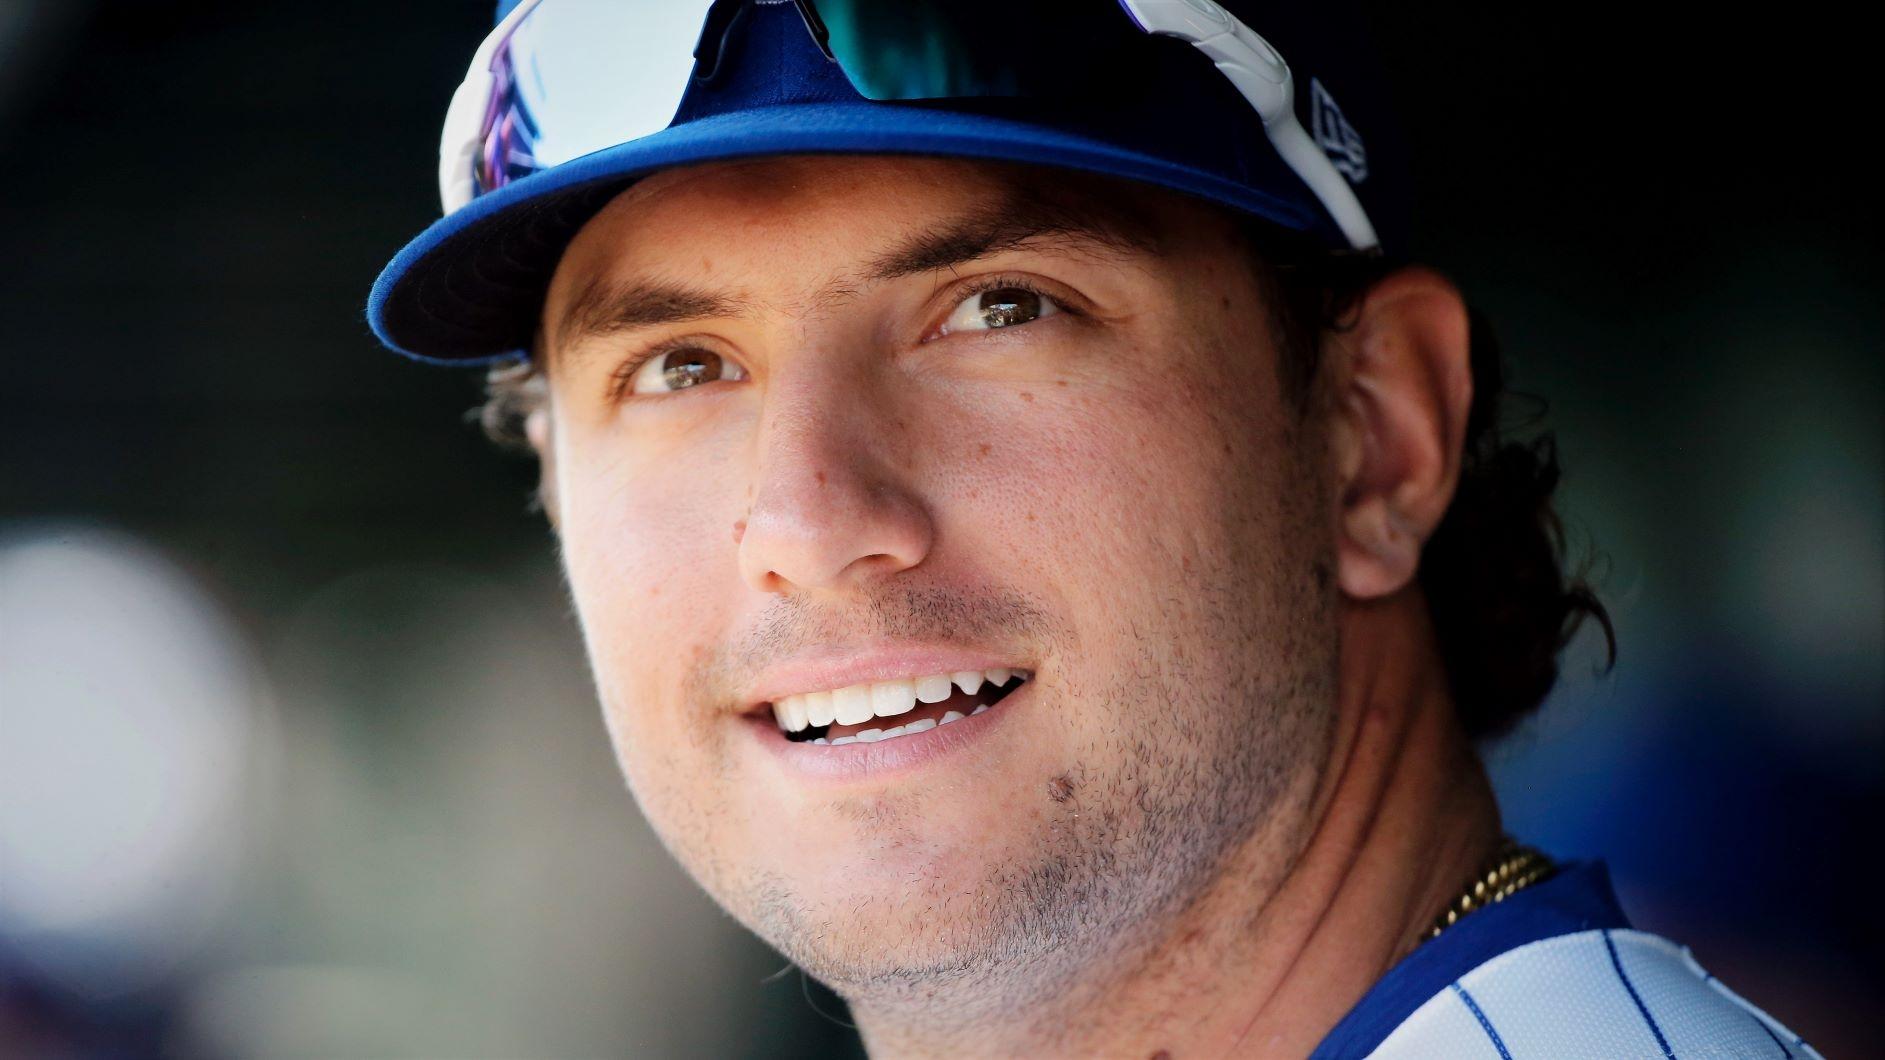 Aug 4, 2019; Chicago, IL, USA; Chicago Cubs center fielder Albert Almora Jr. (5) smiles while in the dugout before the game against the Milwaukee Brewers at Wrigley Field. The Chicago Cubs won 7-2. Mandatory Credit: Jon Durr-USA TODAY Sports / © Jon Durr-USA TODAY Sports